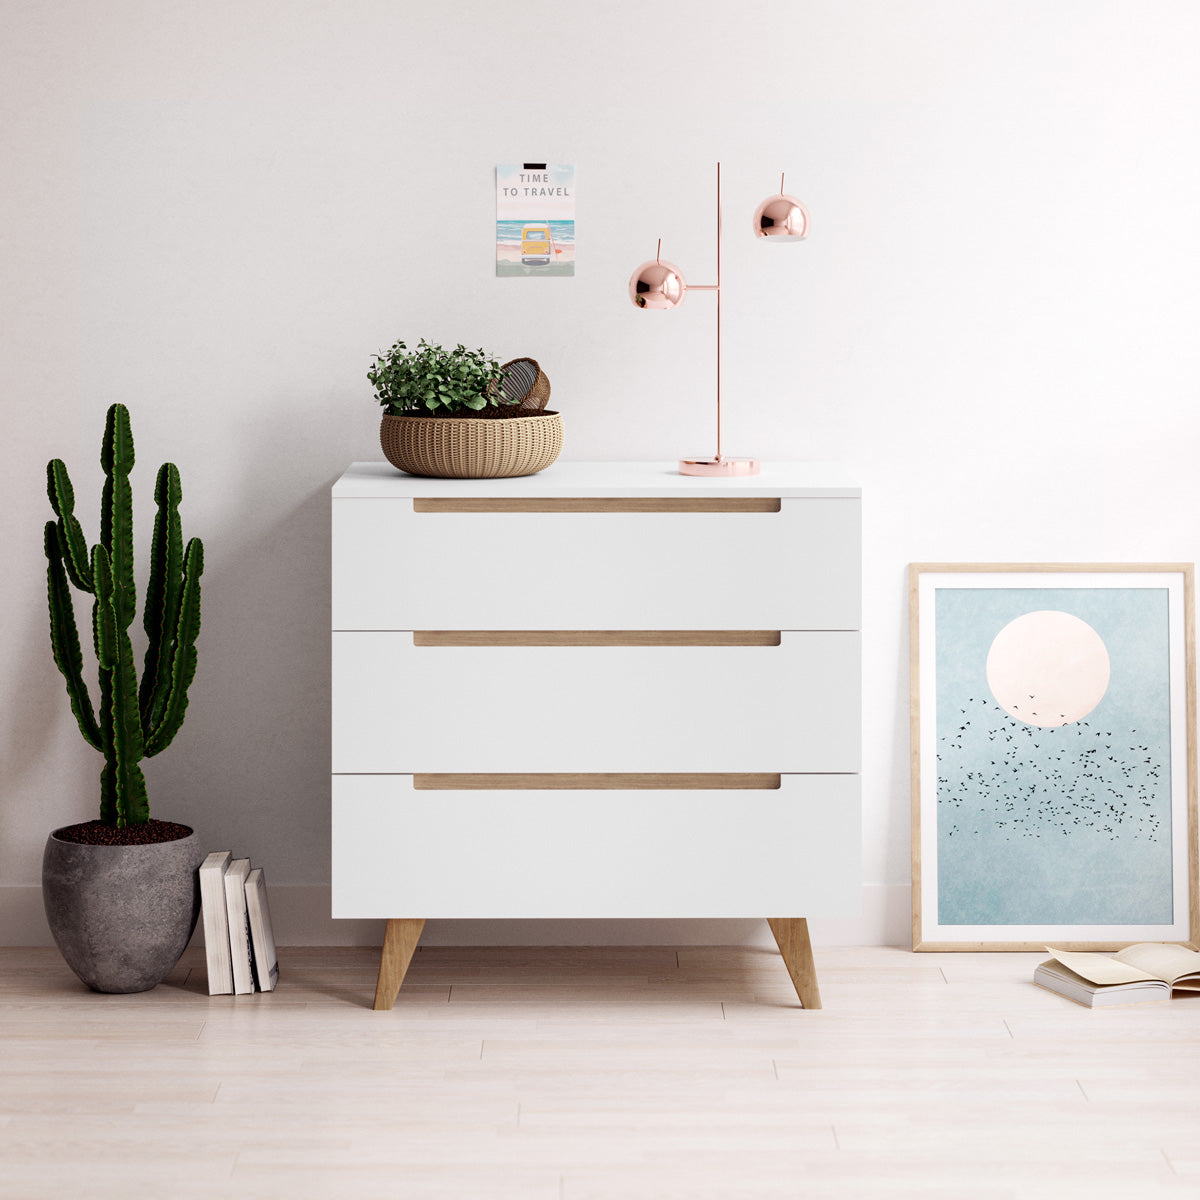 White Three Drawer Chest Unit with Solid Oak Legs (Olsen Collection)